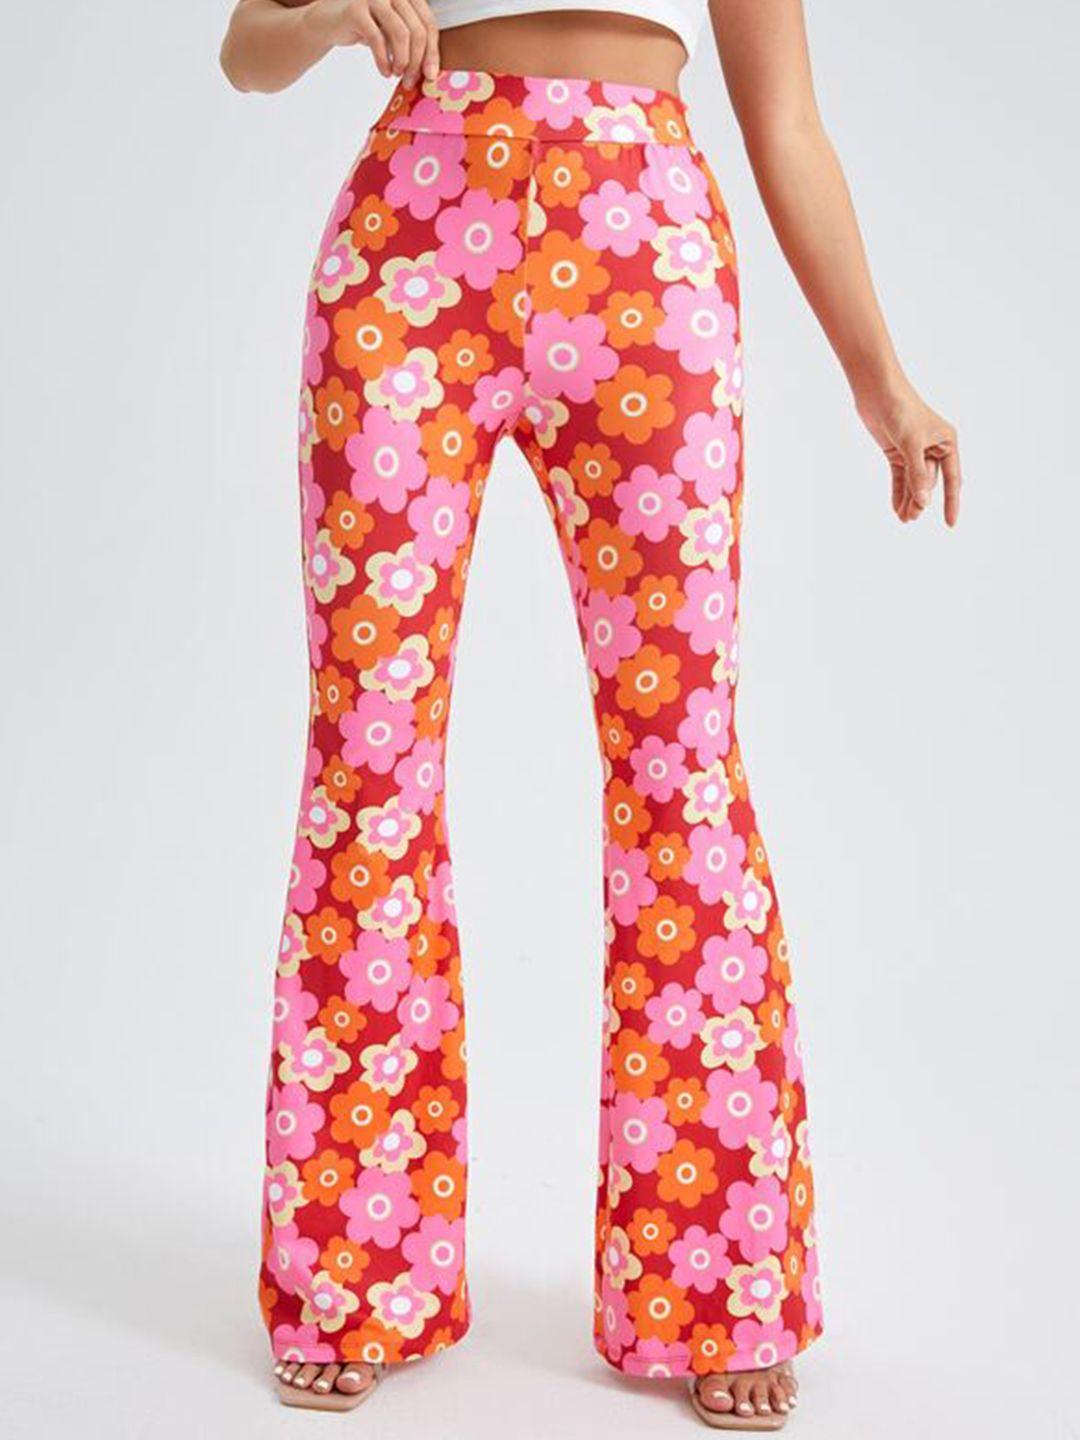 fashion-booms-women-high-rise-floral-printed-bootcut-trousers